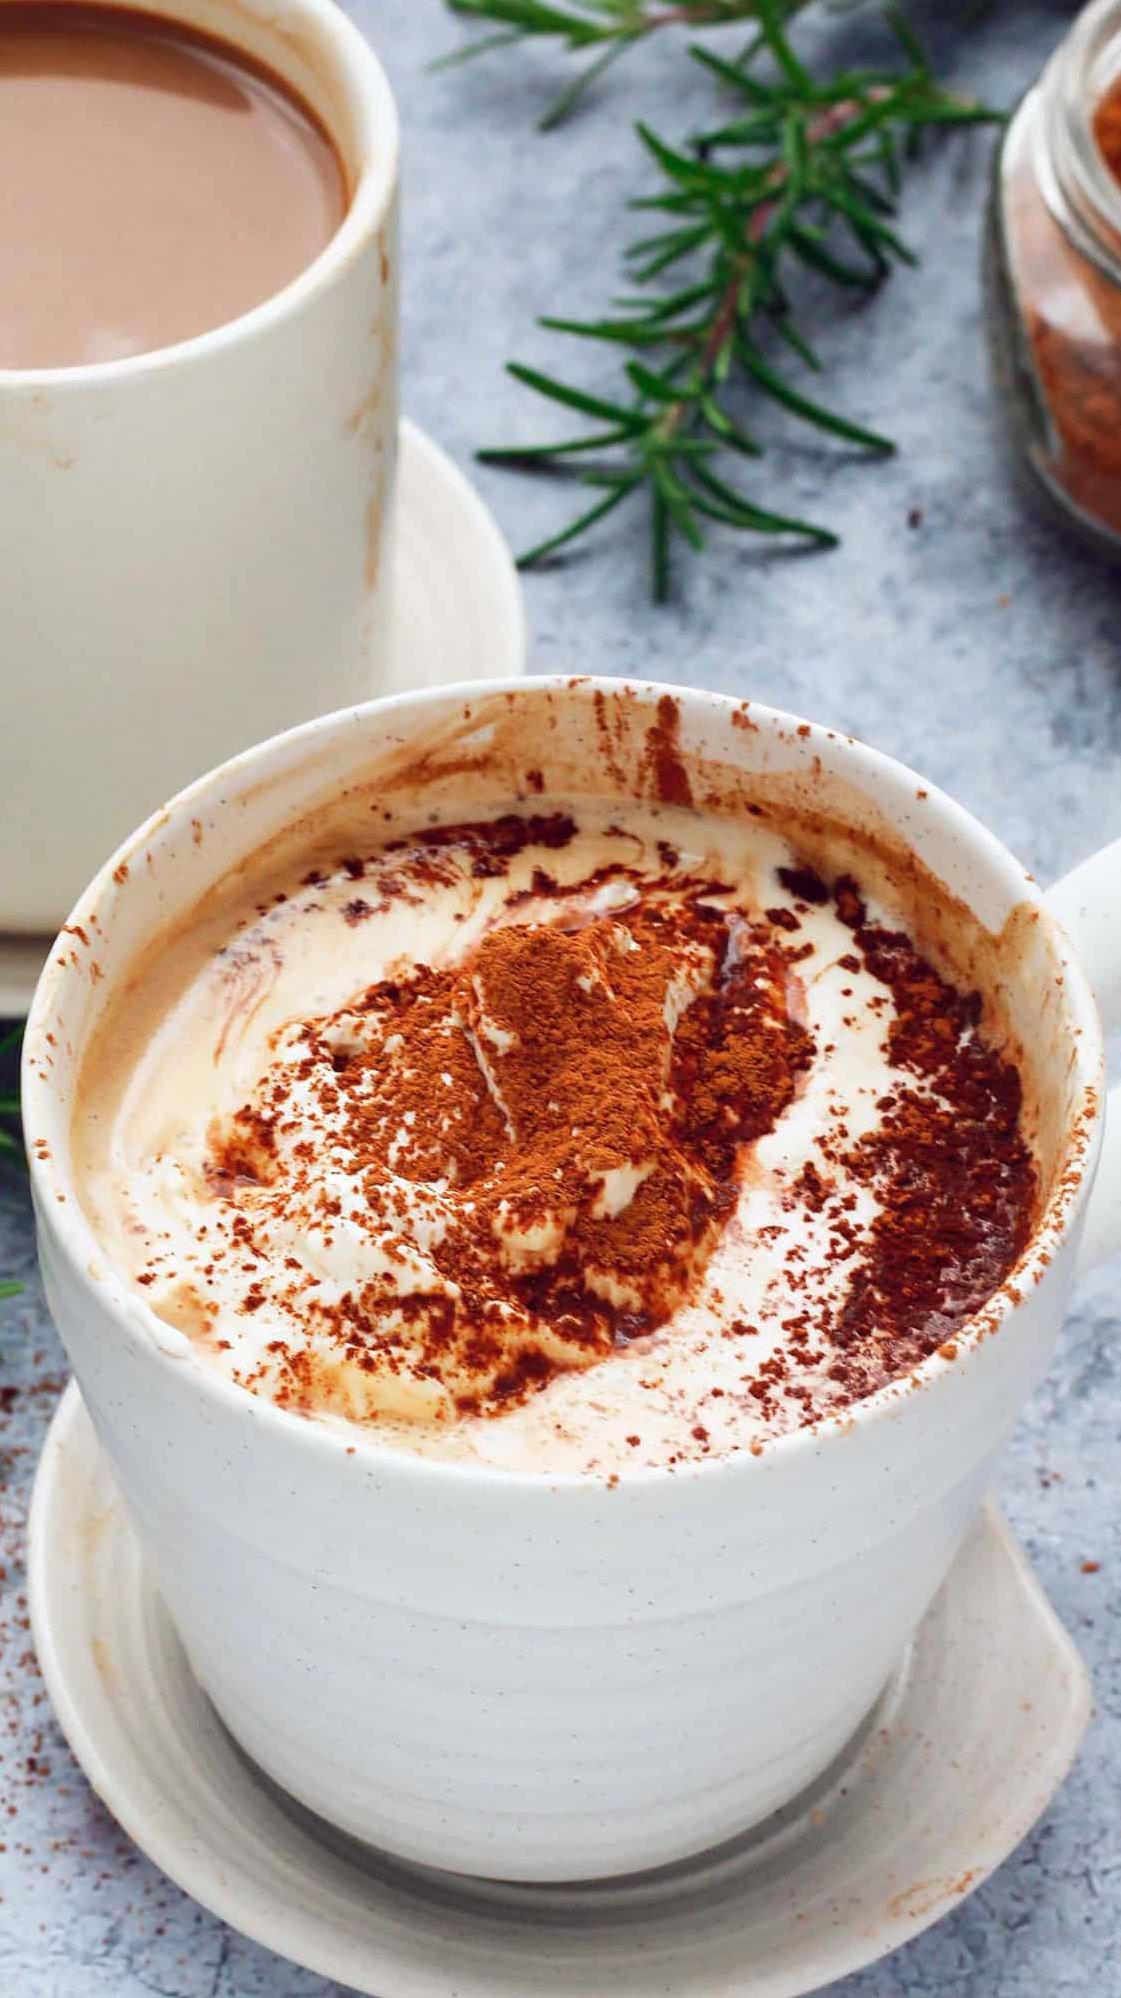  Skip the long lines at the coffee shop and make your own mocha at home